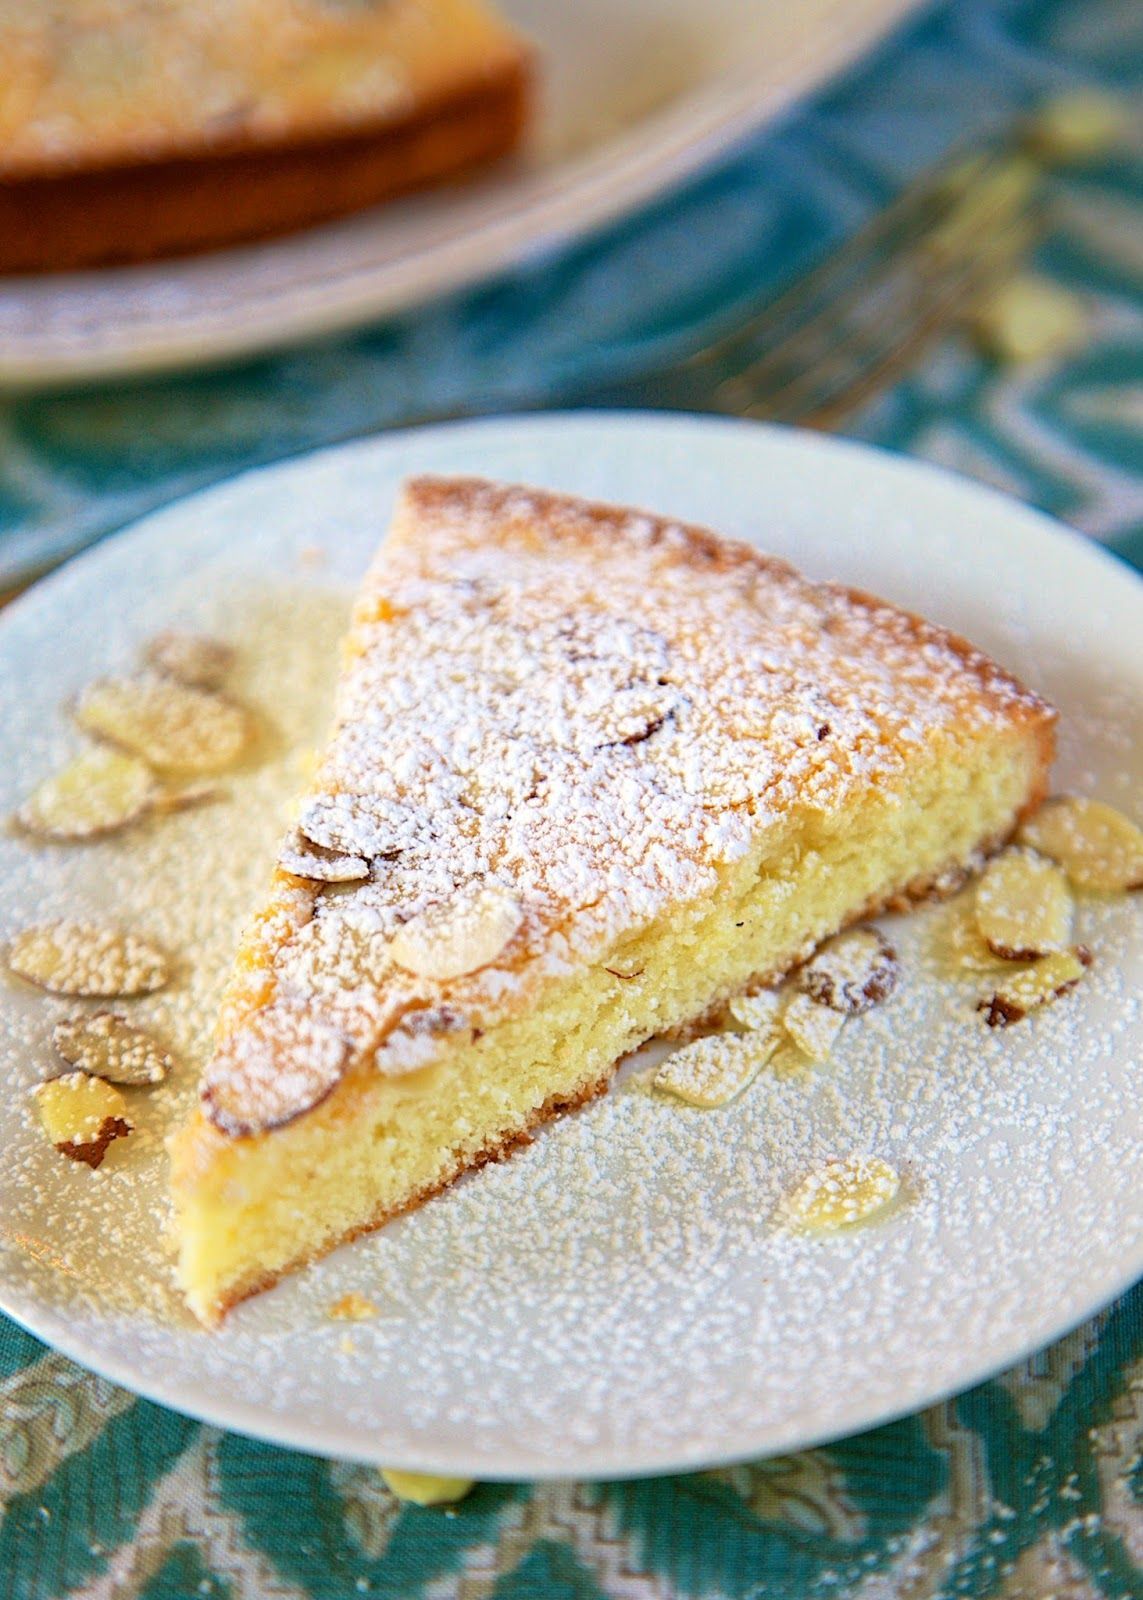 5-Minute Almond Cake Recipe - quick and delicious almond cake - only takes 5 minutes to make! It was ready before the oven preheated!! Great with a nice cup of coffee. -   20 almond cake recipes
 ideas